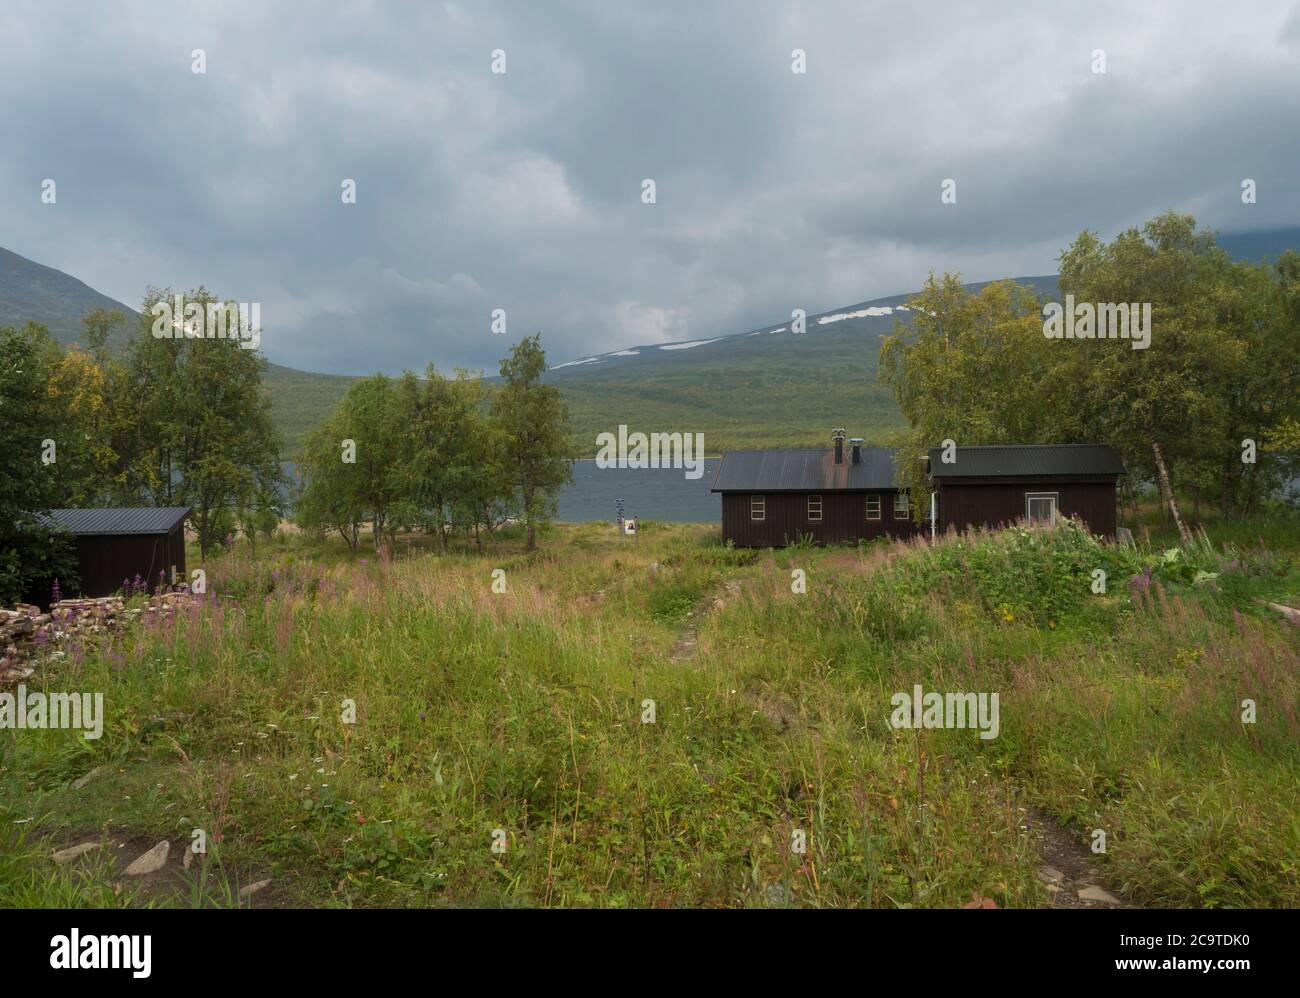 STF Teusajaure Fjallstuga Mountain cabin hut with blue Teusajaure lake, green hills, birch forest and footpath of Kungsleden hiking trail. Lapland nat Stock Photo